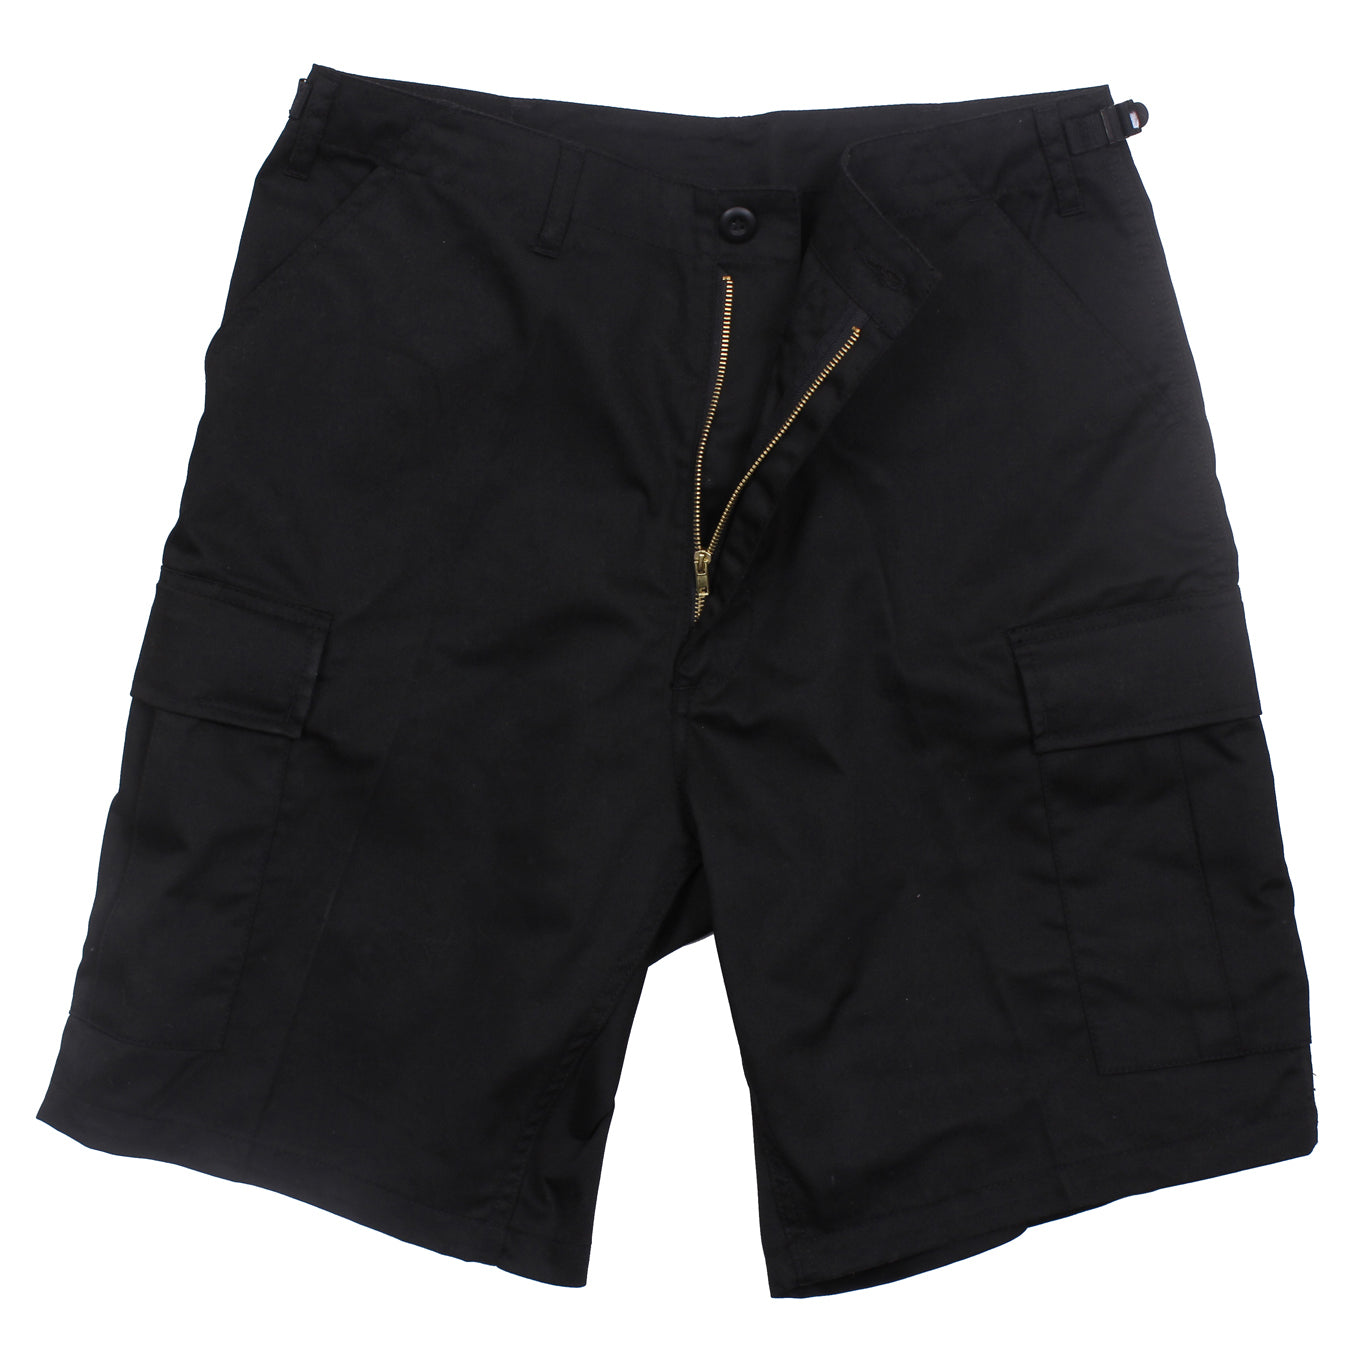 Rothco Zipper Fly BDU Combat Shorts - Tactical Choice Plus